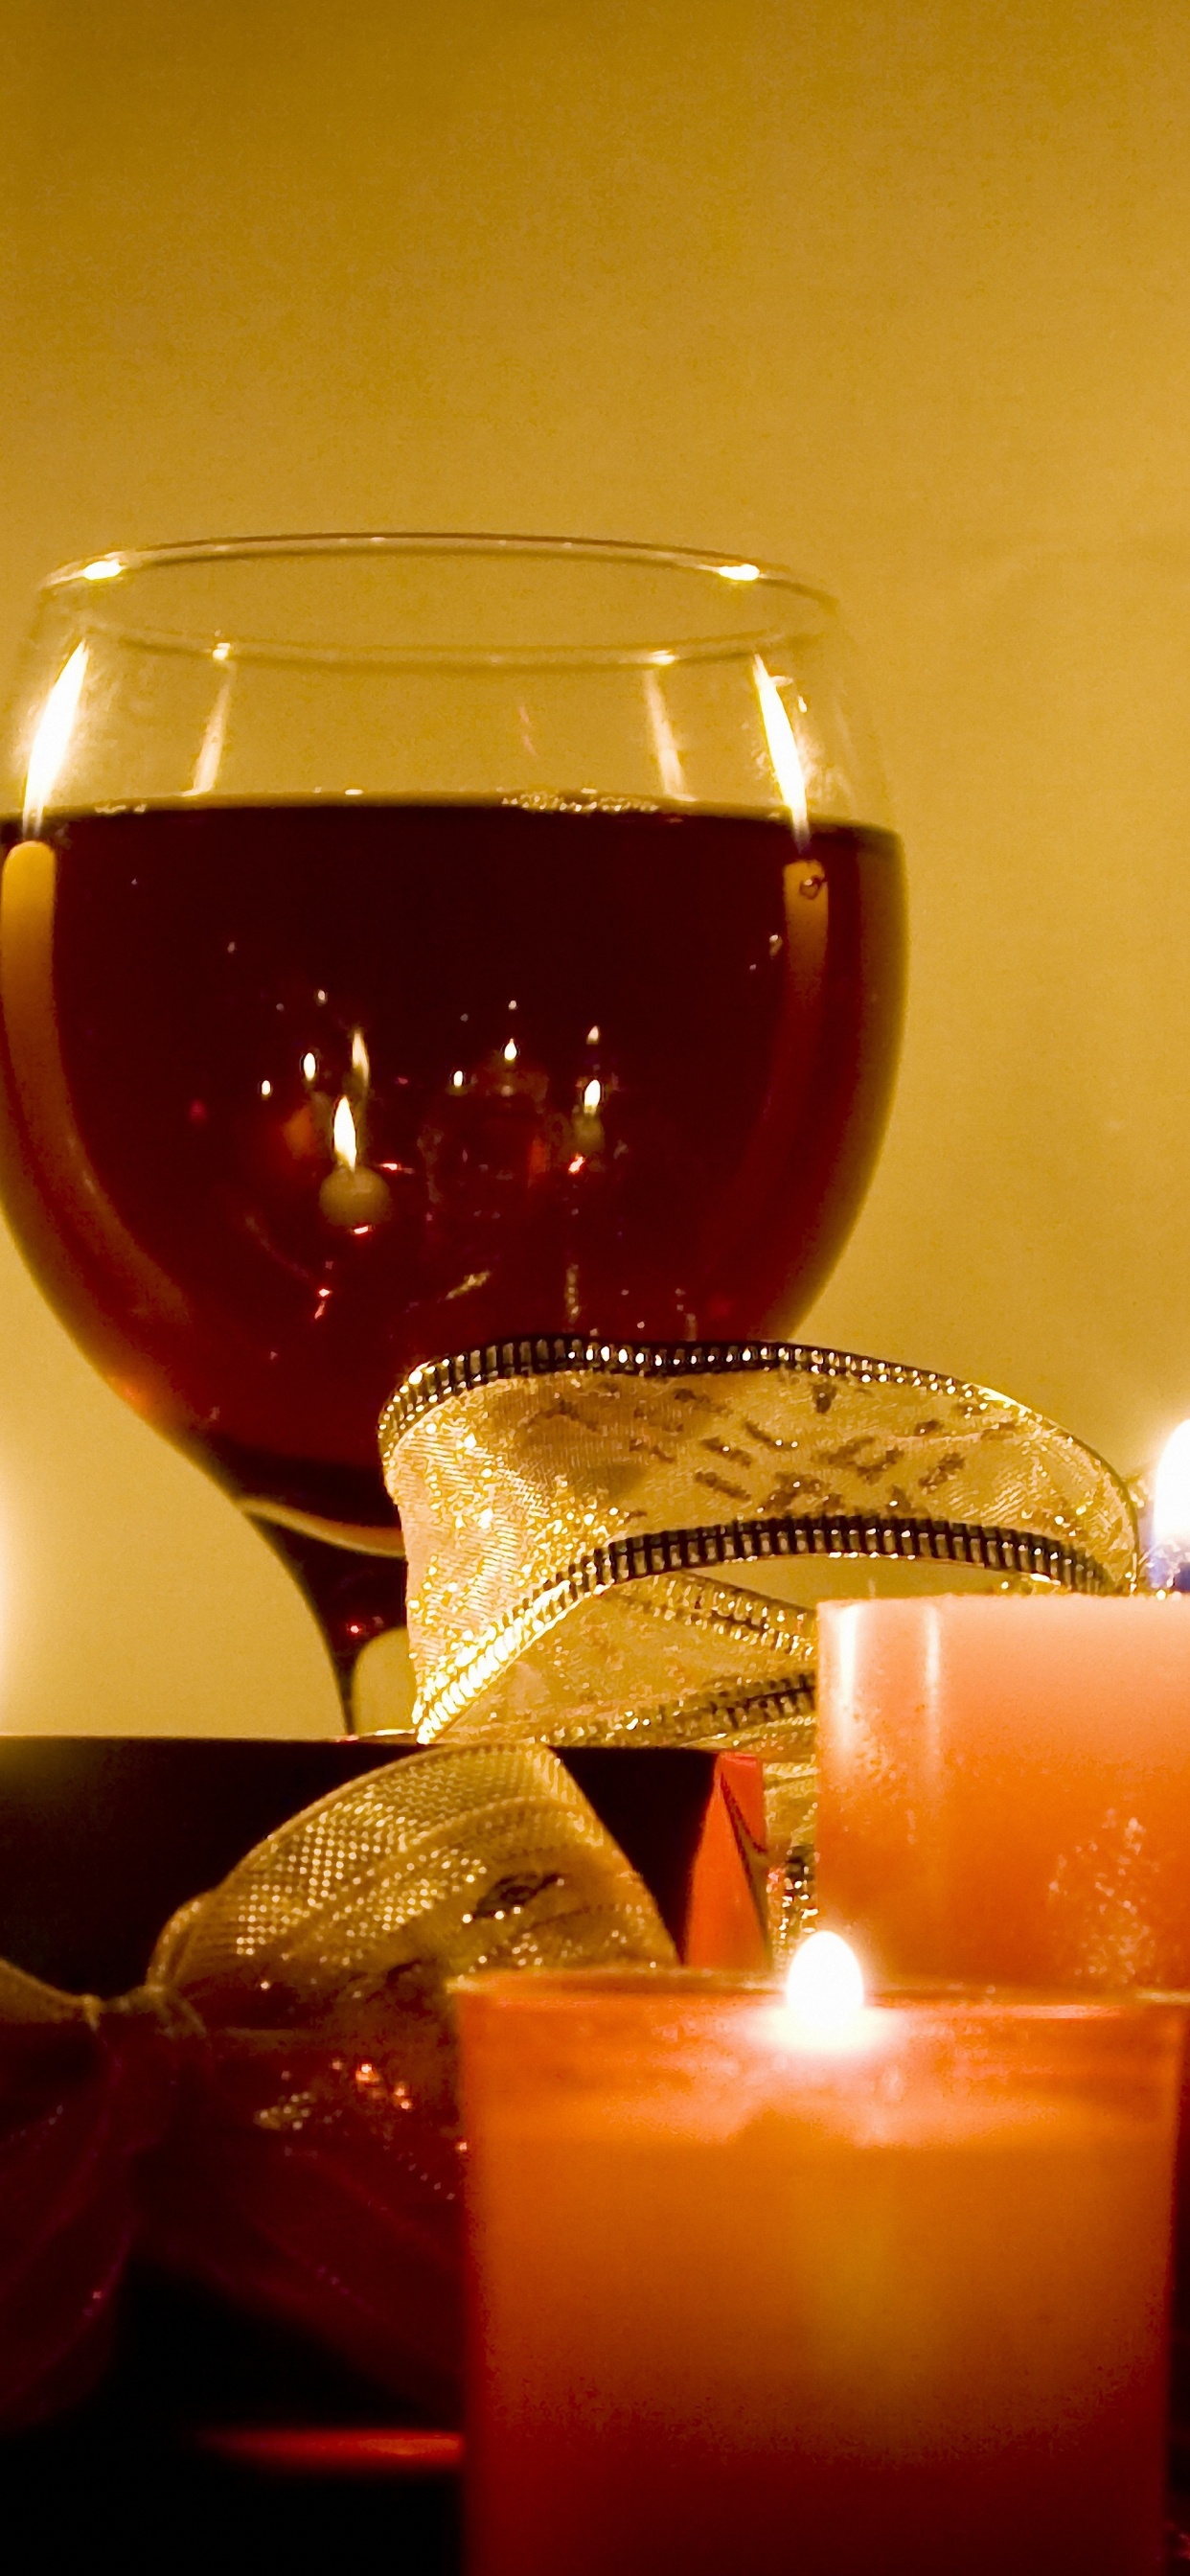 Wine, Candle, Lighting, Wax, Still Life. Wallpaper in 1242x2688 Resolution